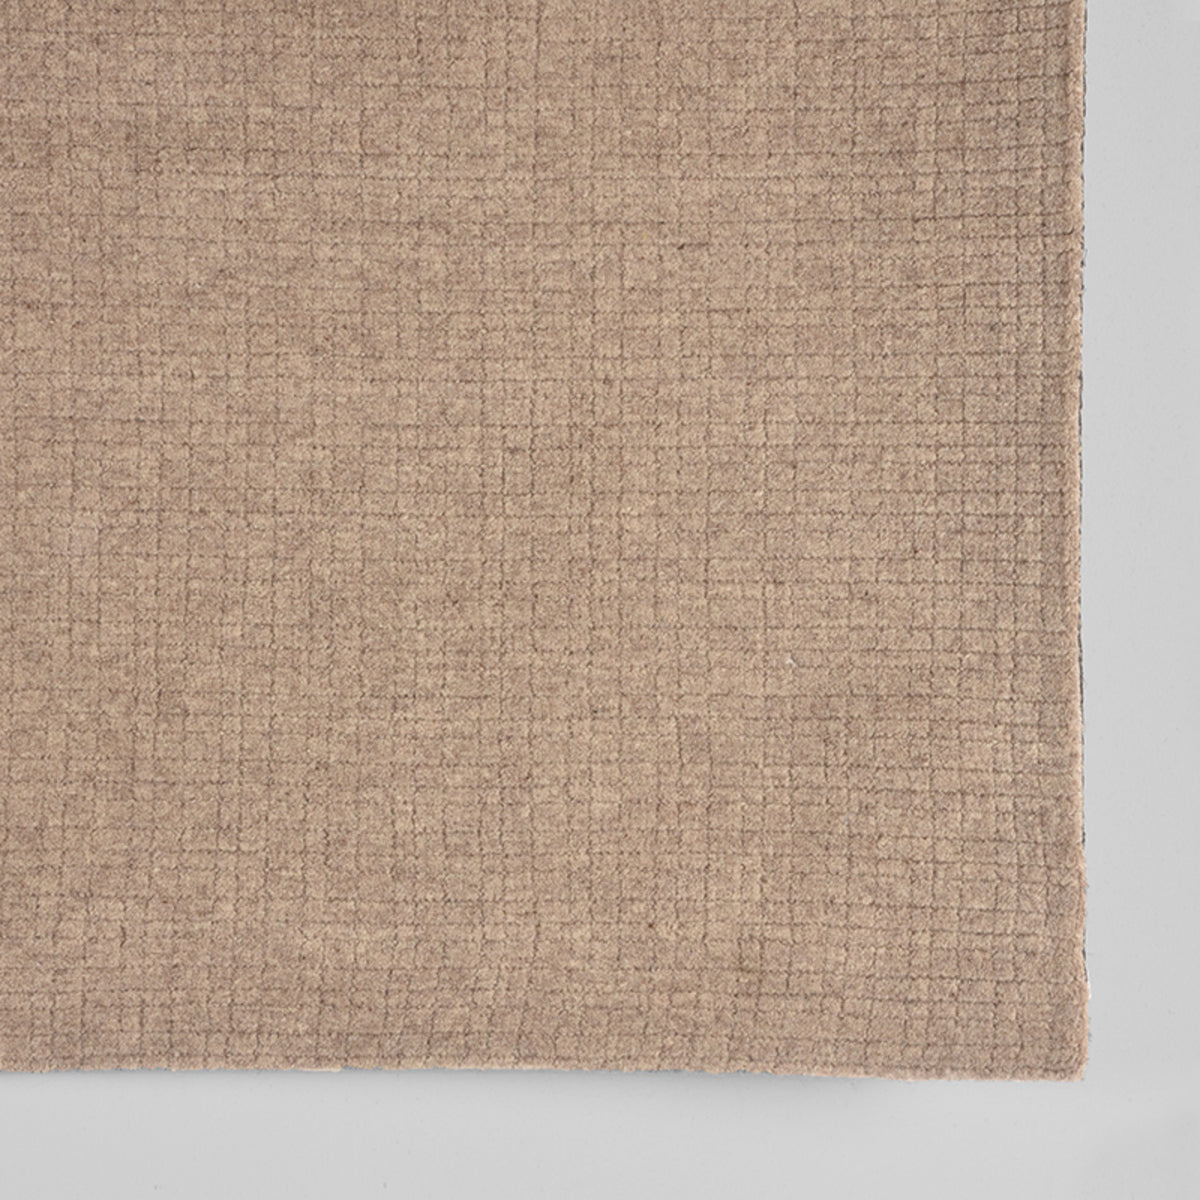 LABEL51 Rugs Wolly - Taupe - Wool - 160x230 cm